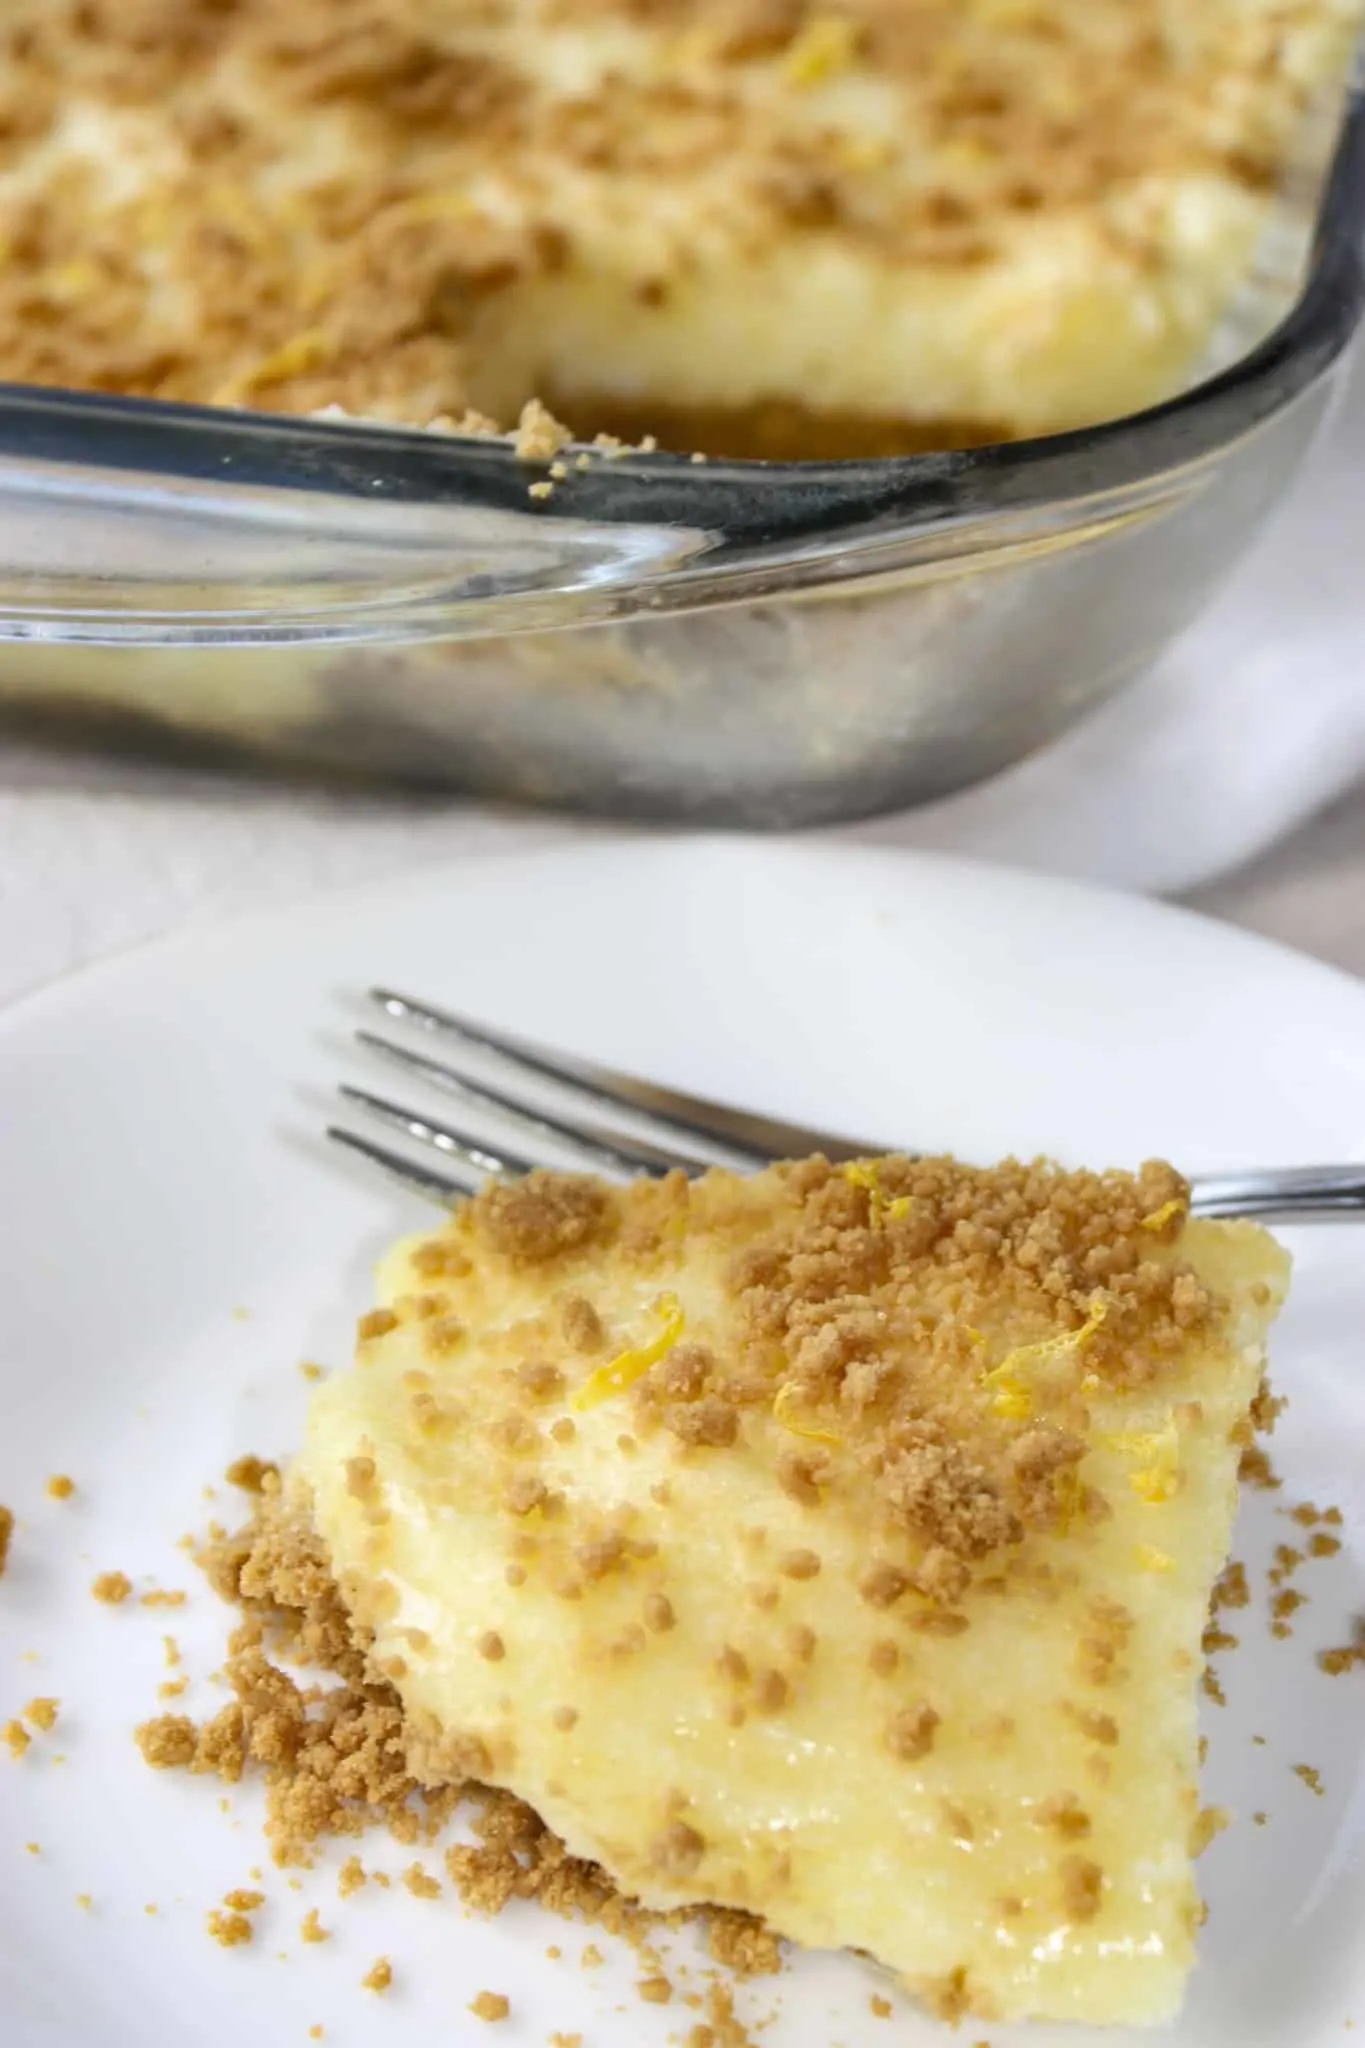 Lemon Fluff Square is a very light and refreshing citrus dessert that is a tasty way to complete your meal.  This gluten free summer dessert loaded with citrus flavour will quickly become a staple in your home!